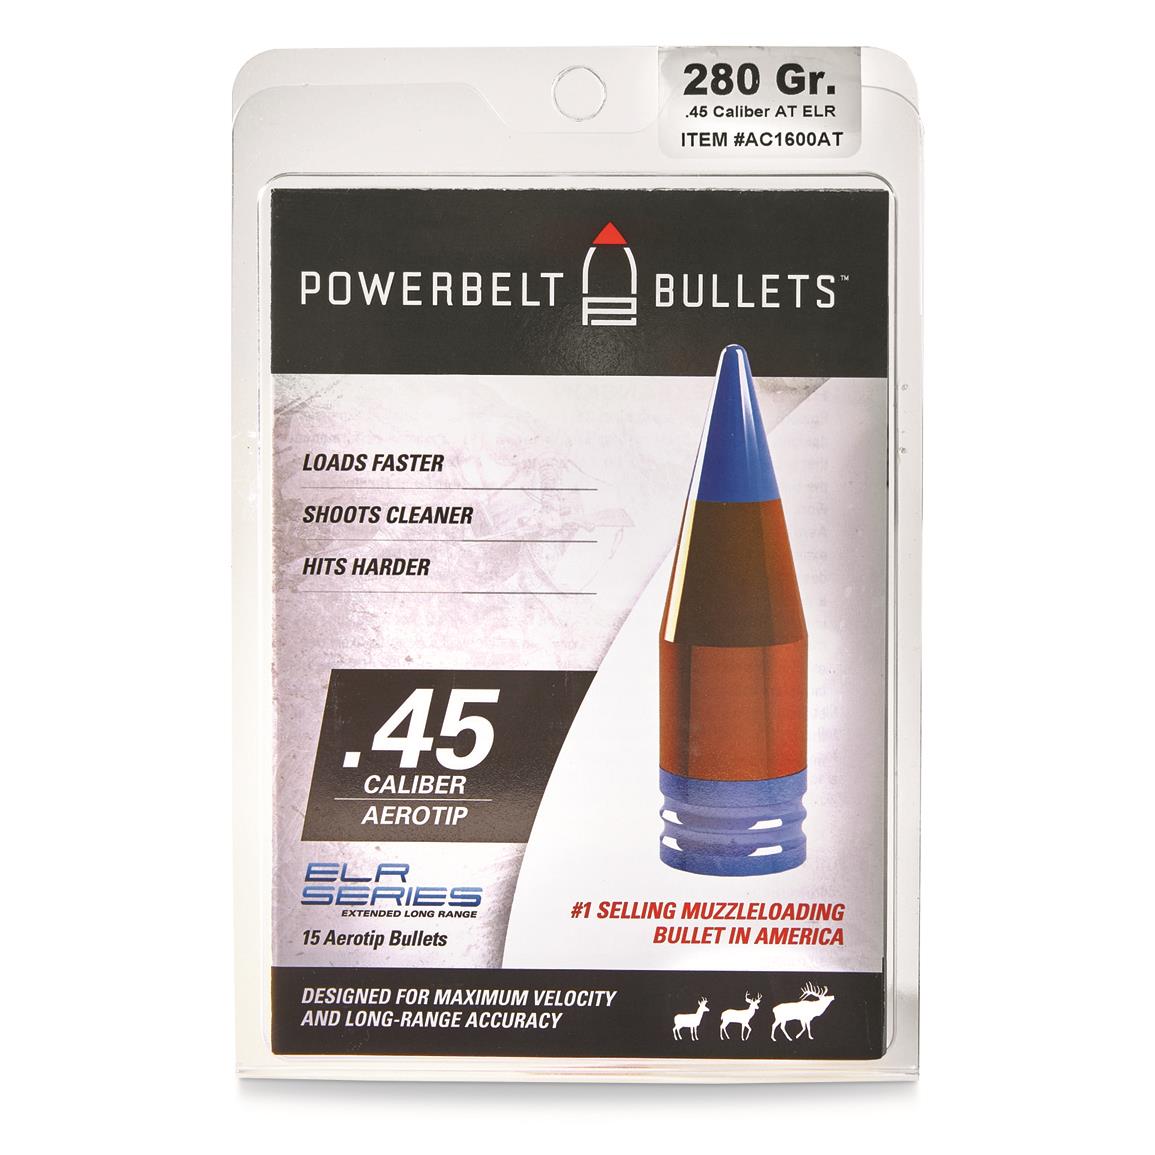 CVA Powerbelt ELR .45 cal. Bullets, 285 Grain, 15 Rounds. Note: Photo may not depict actual packaging. Please refer to item description and review your order to ensure exact calibers and quantities.